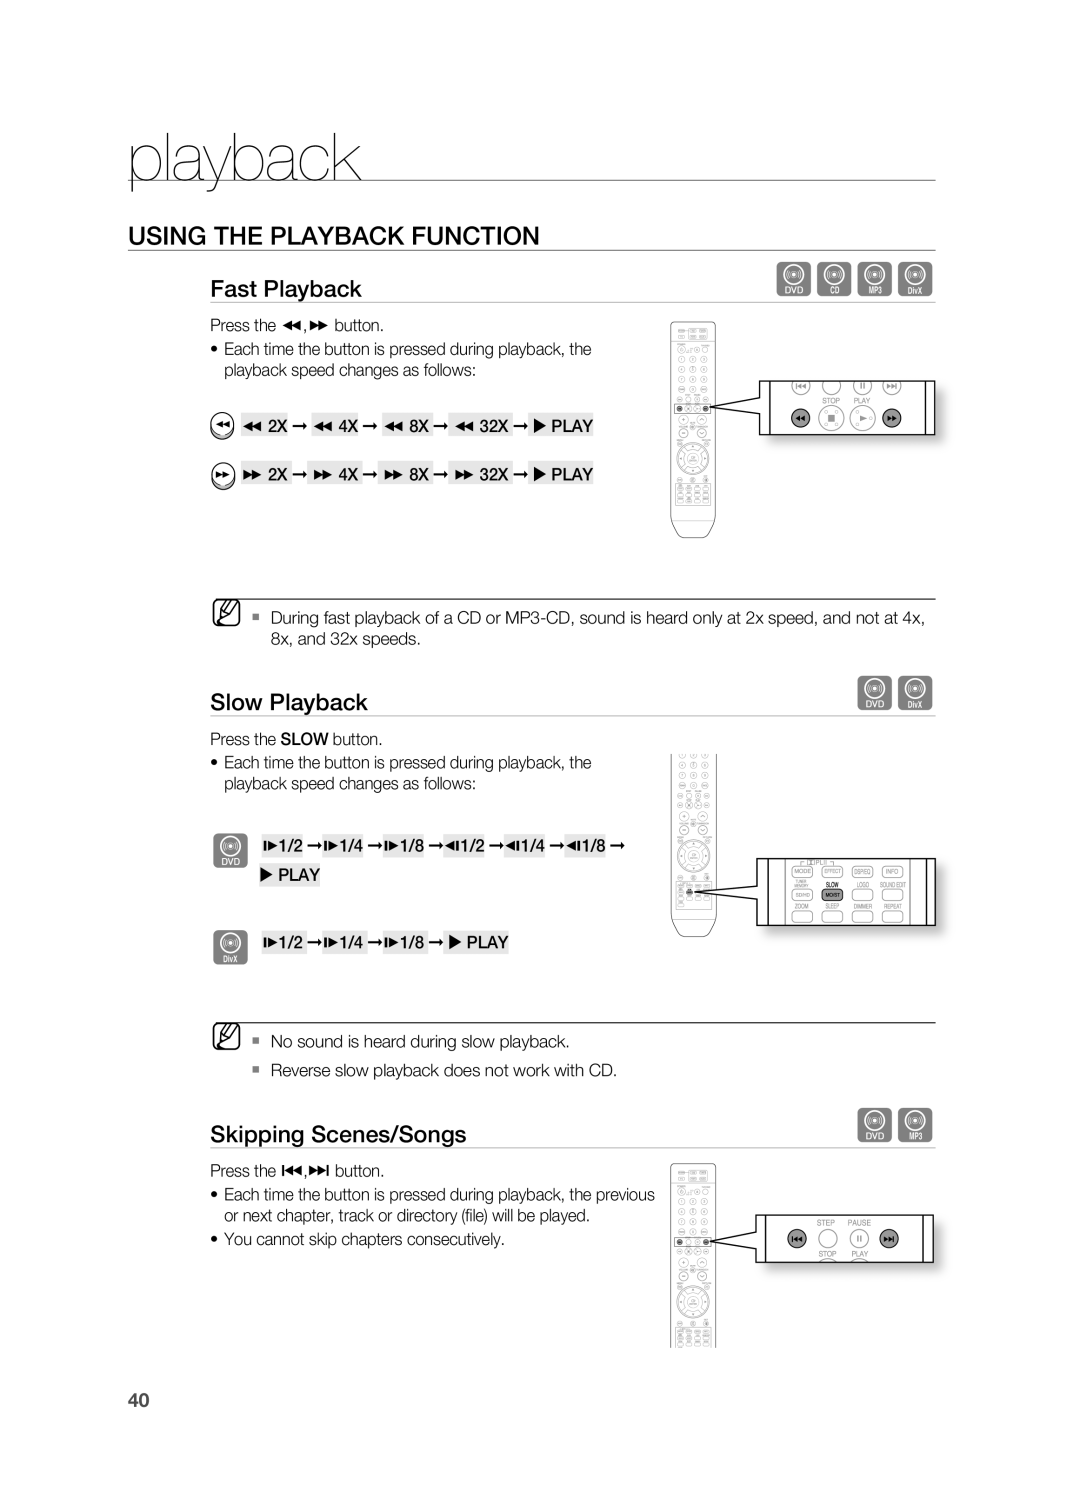 Samsung HT-TWZ315 manual dBAD, Slow Playback, Skipping Scenes/Songs, playback, USinG tHE PLAyBACK fUnCtiOn, fast Playback 